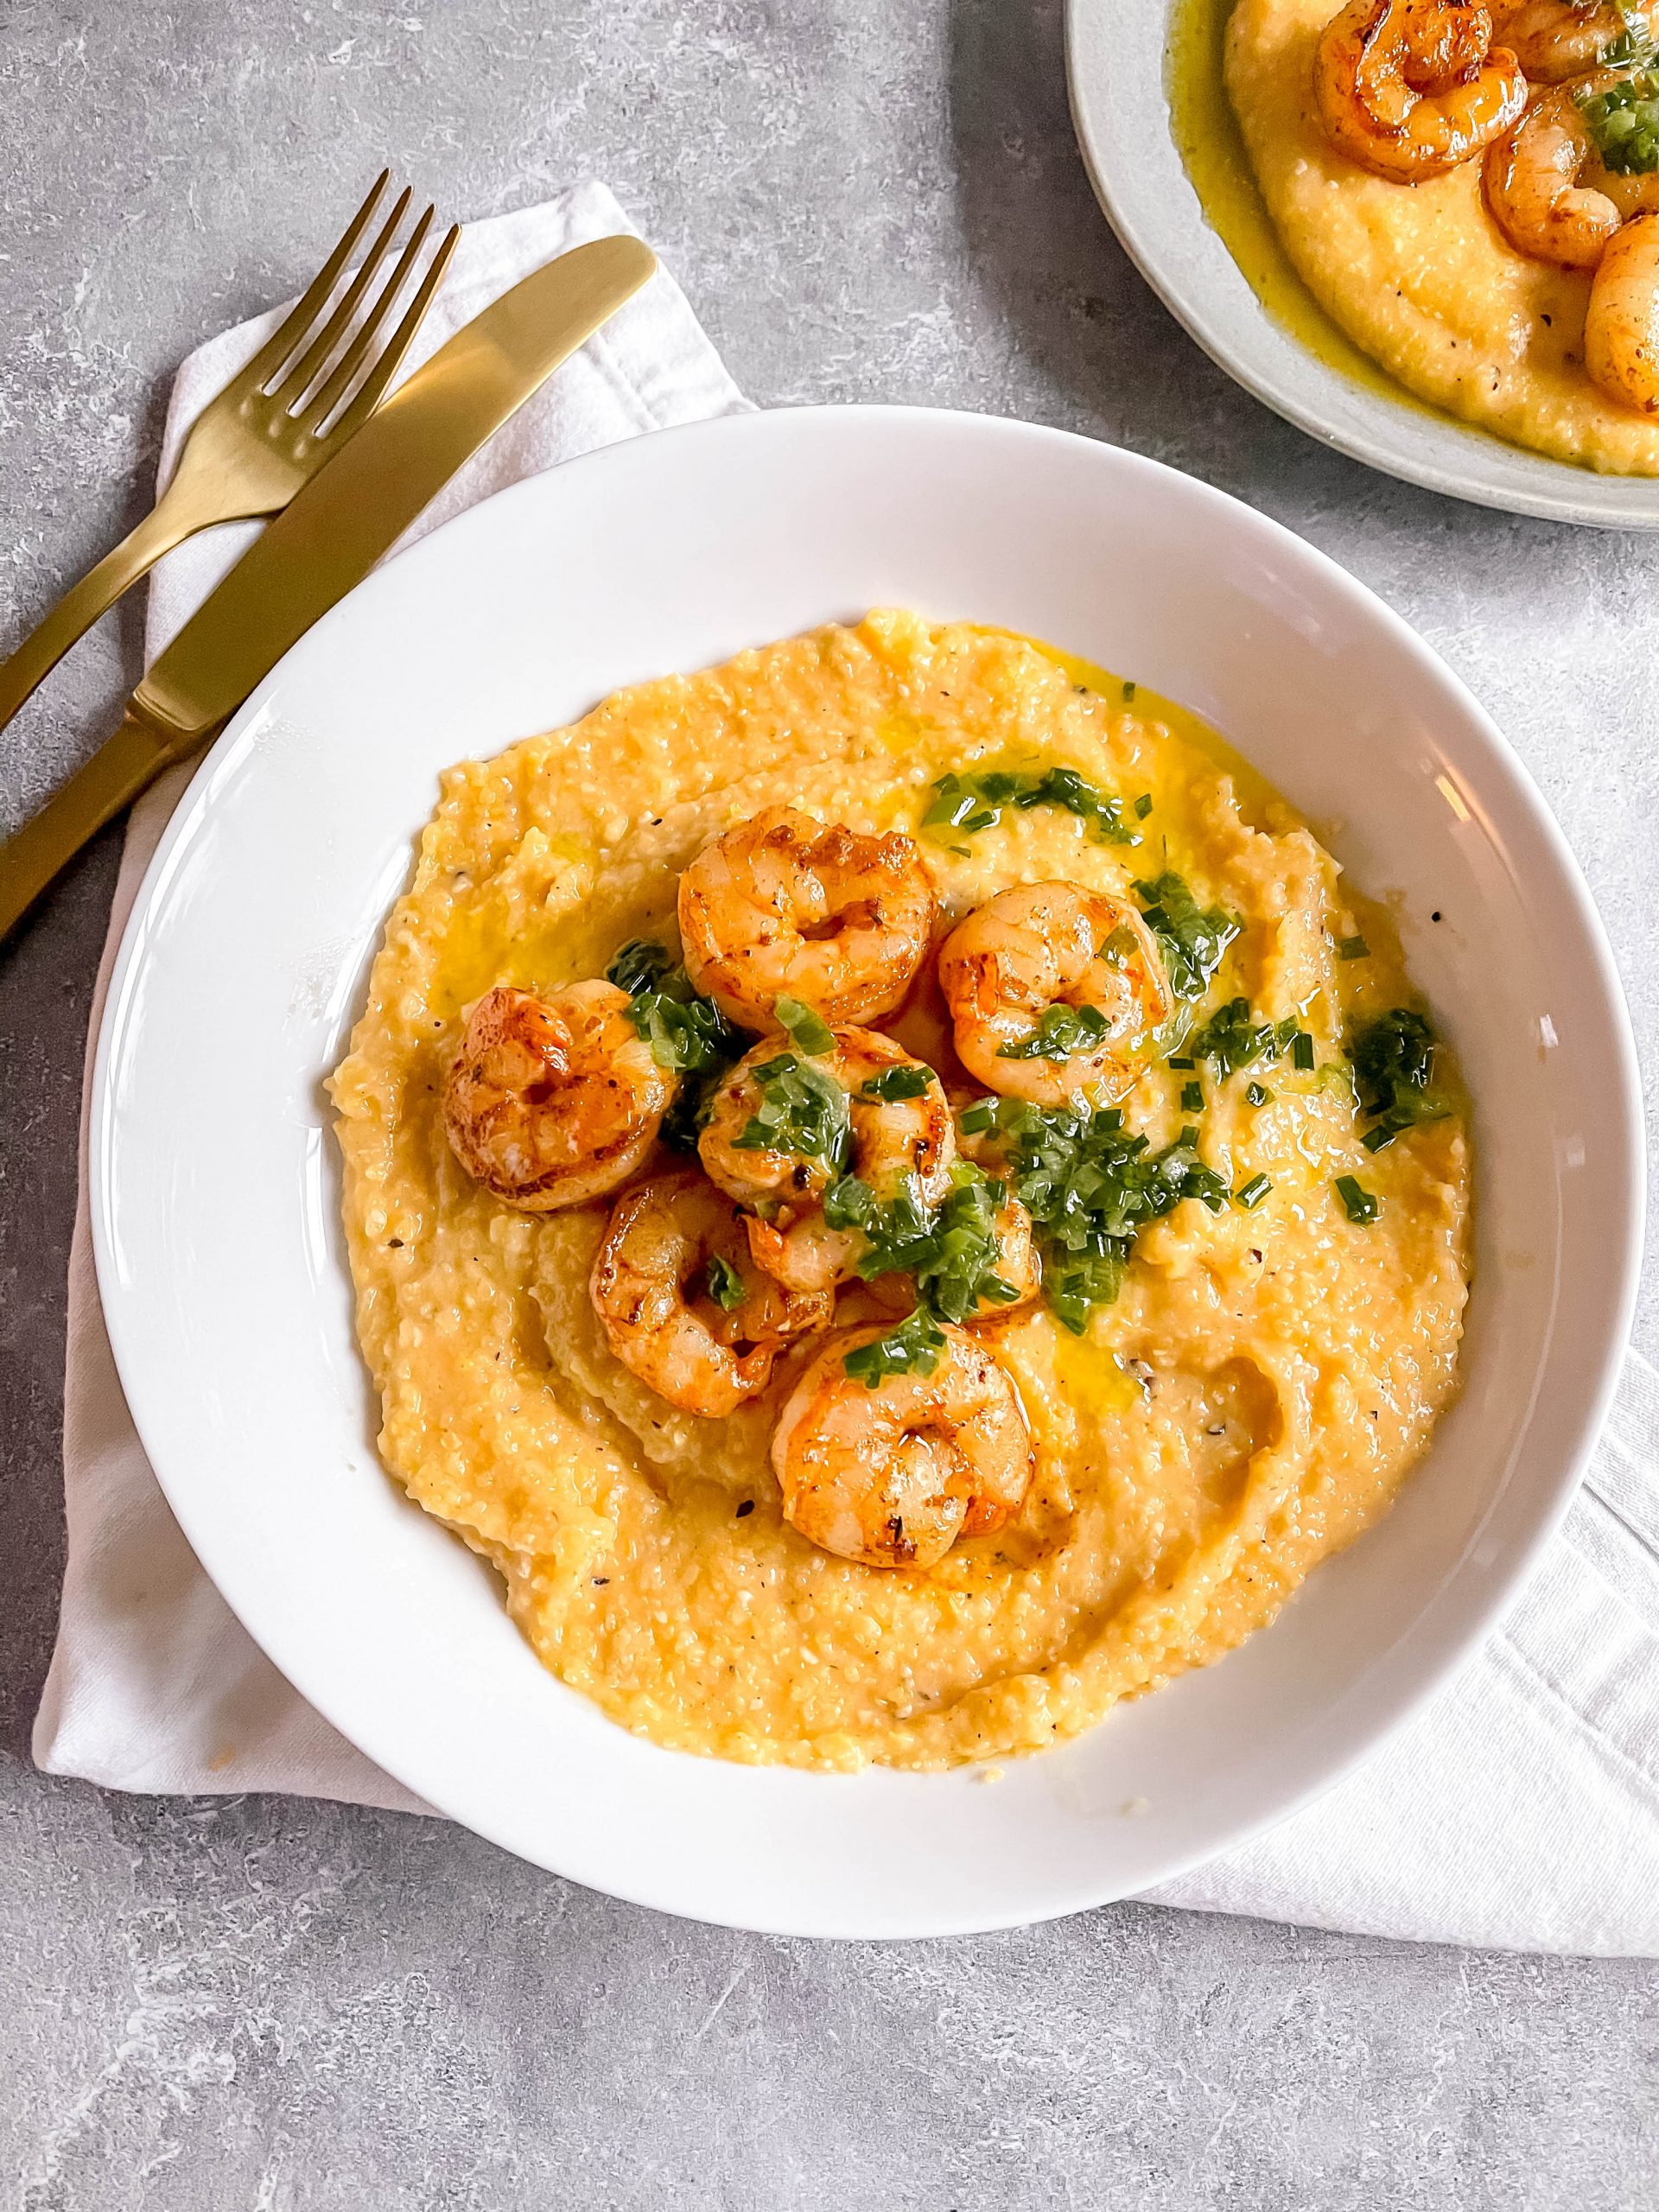 Garlicky Shrimp and Grits with Scallion-Chive Oil